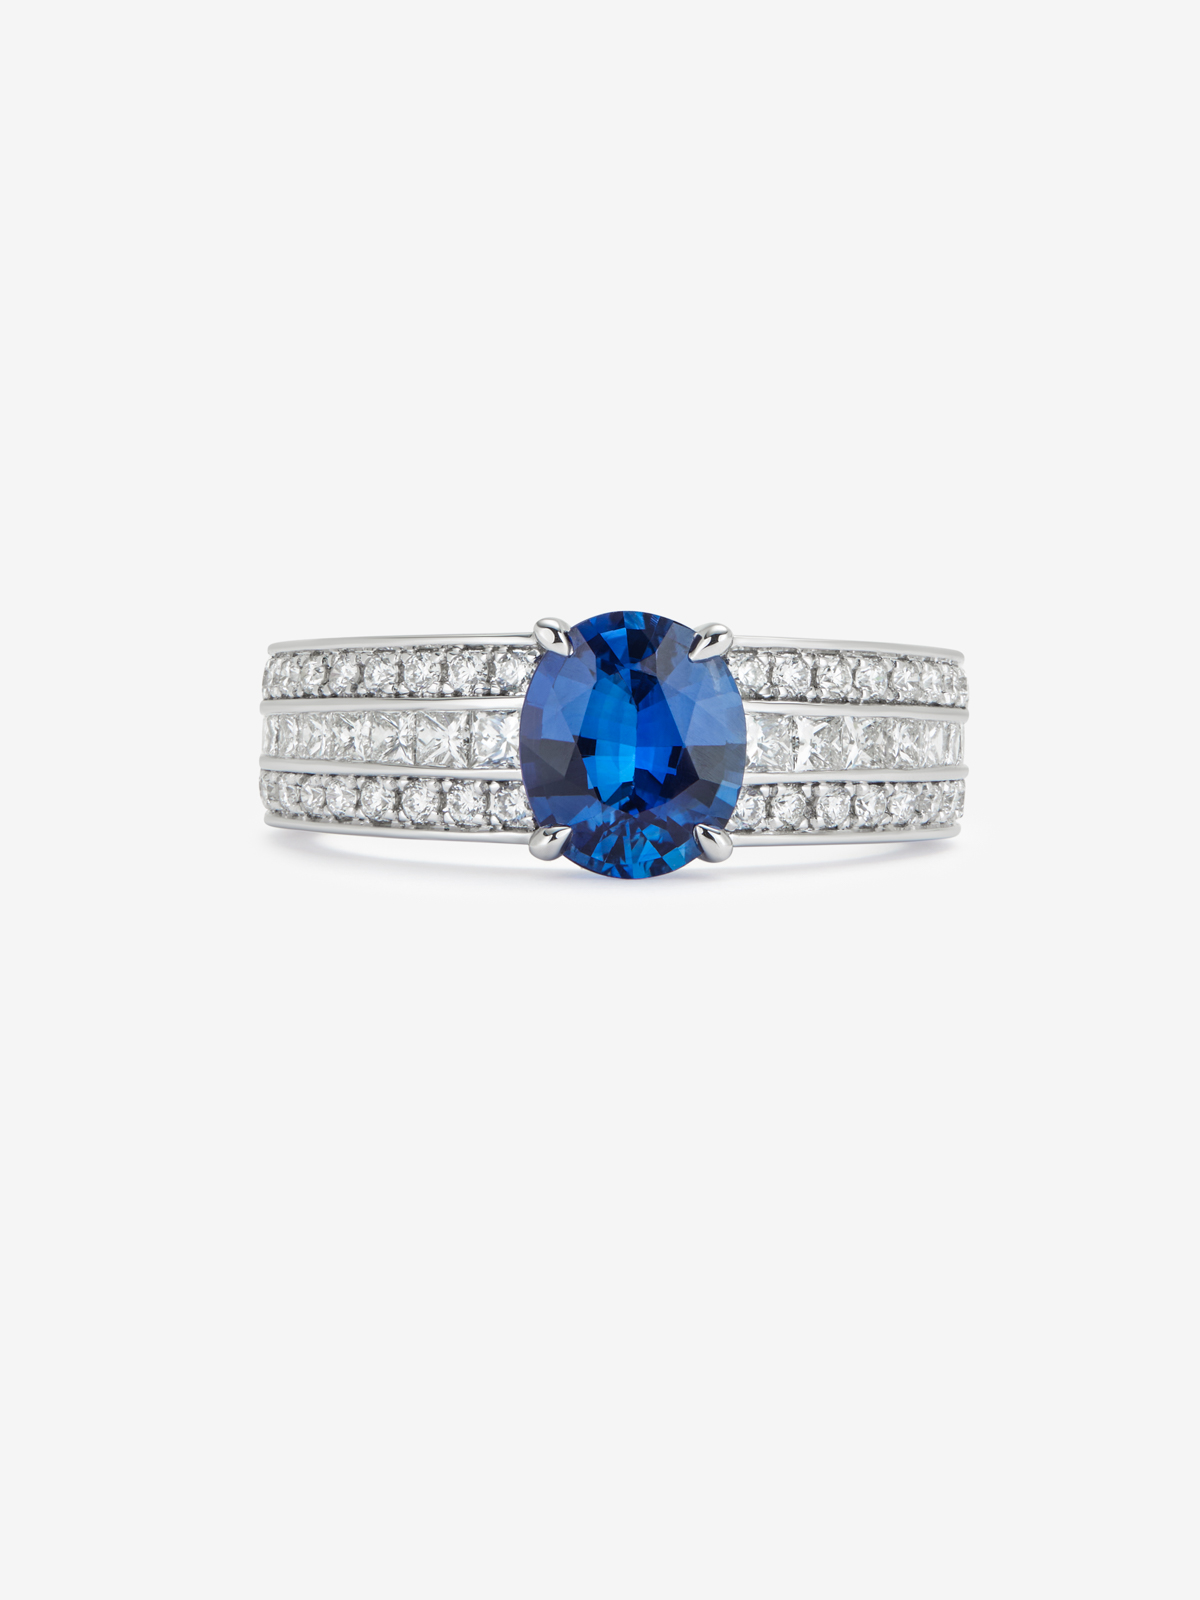 18K white gold ring with oval-cut royal blue sapphire of 2.53 cts, 44 brilliant-cut diamonds with a total of 0.37 cts and 22 princess-cut diamonds with a total of 0.58 cts